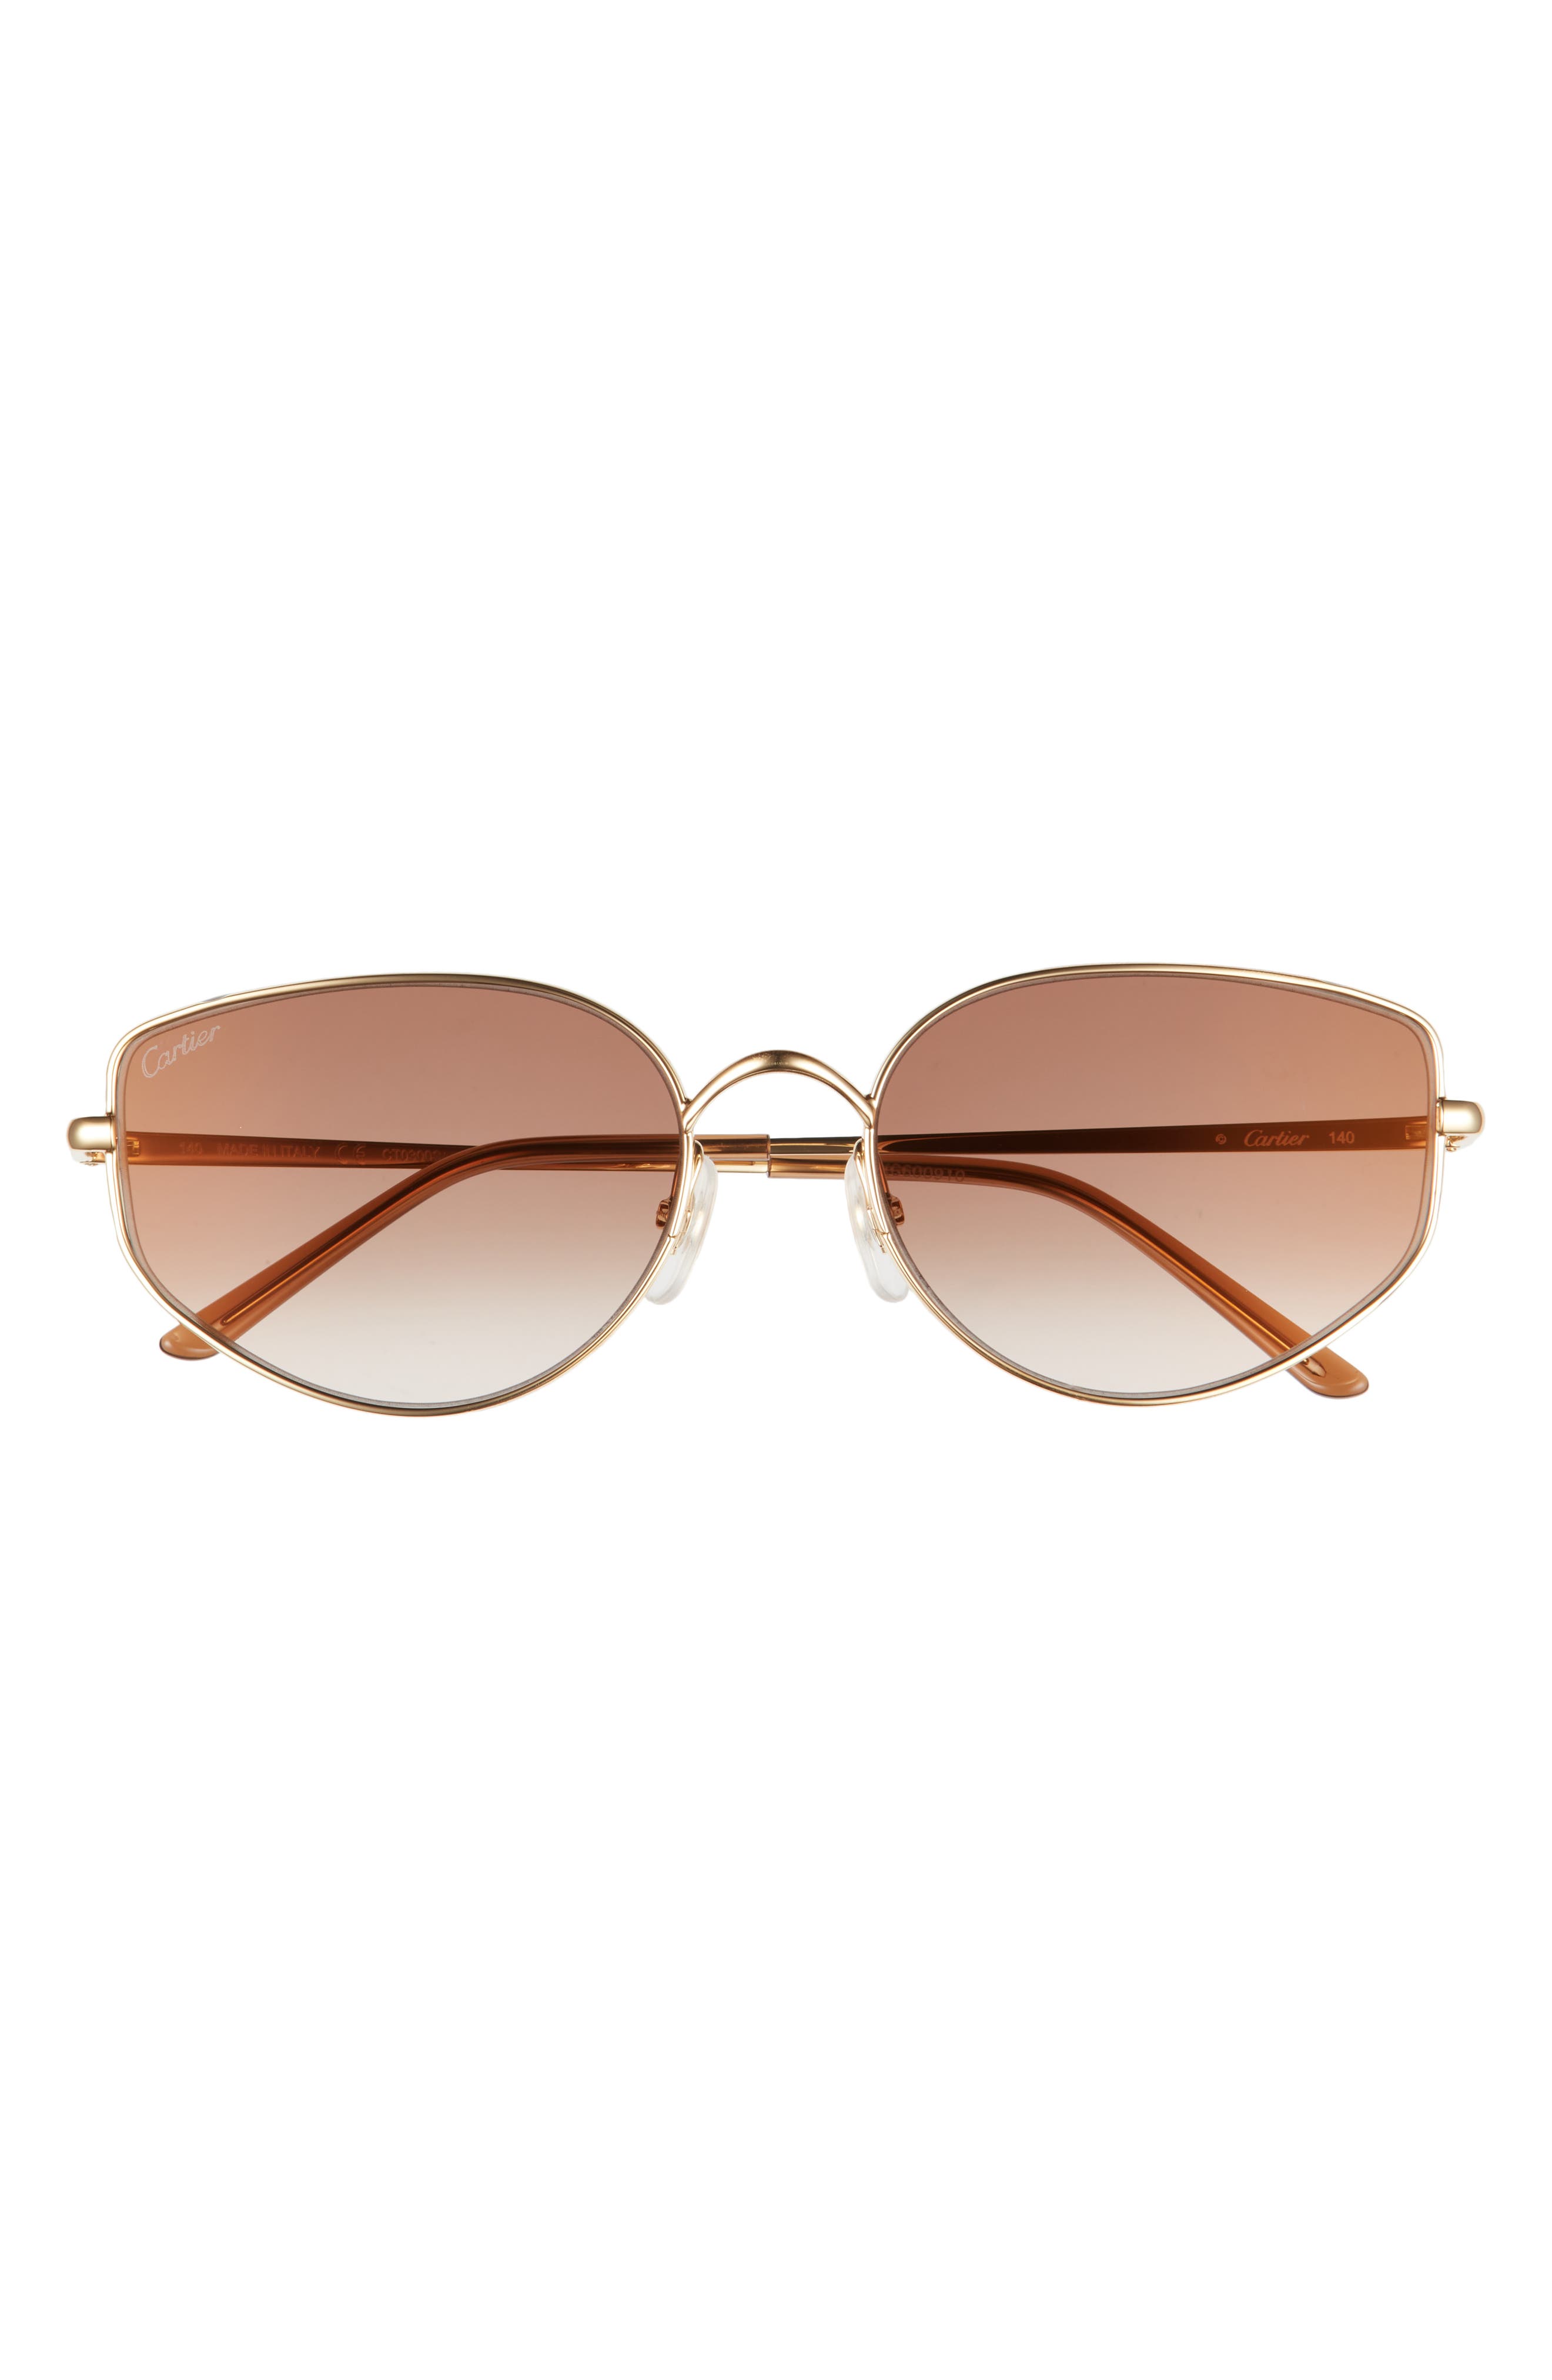 Cartier 58mm Cat Eye Sunglasses in Gold/Brown at Nordstrom